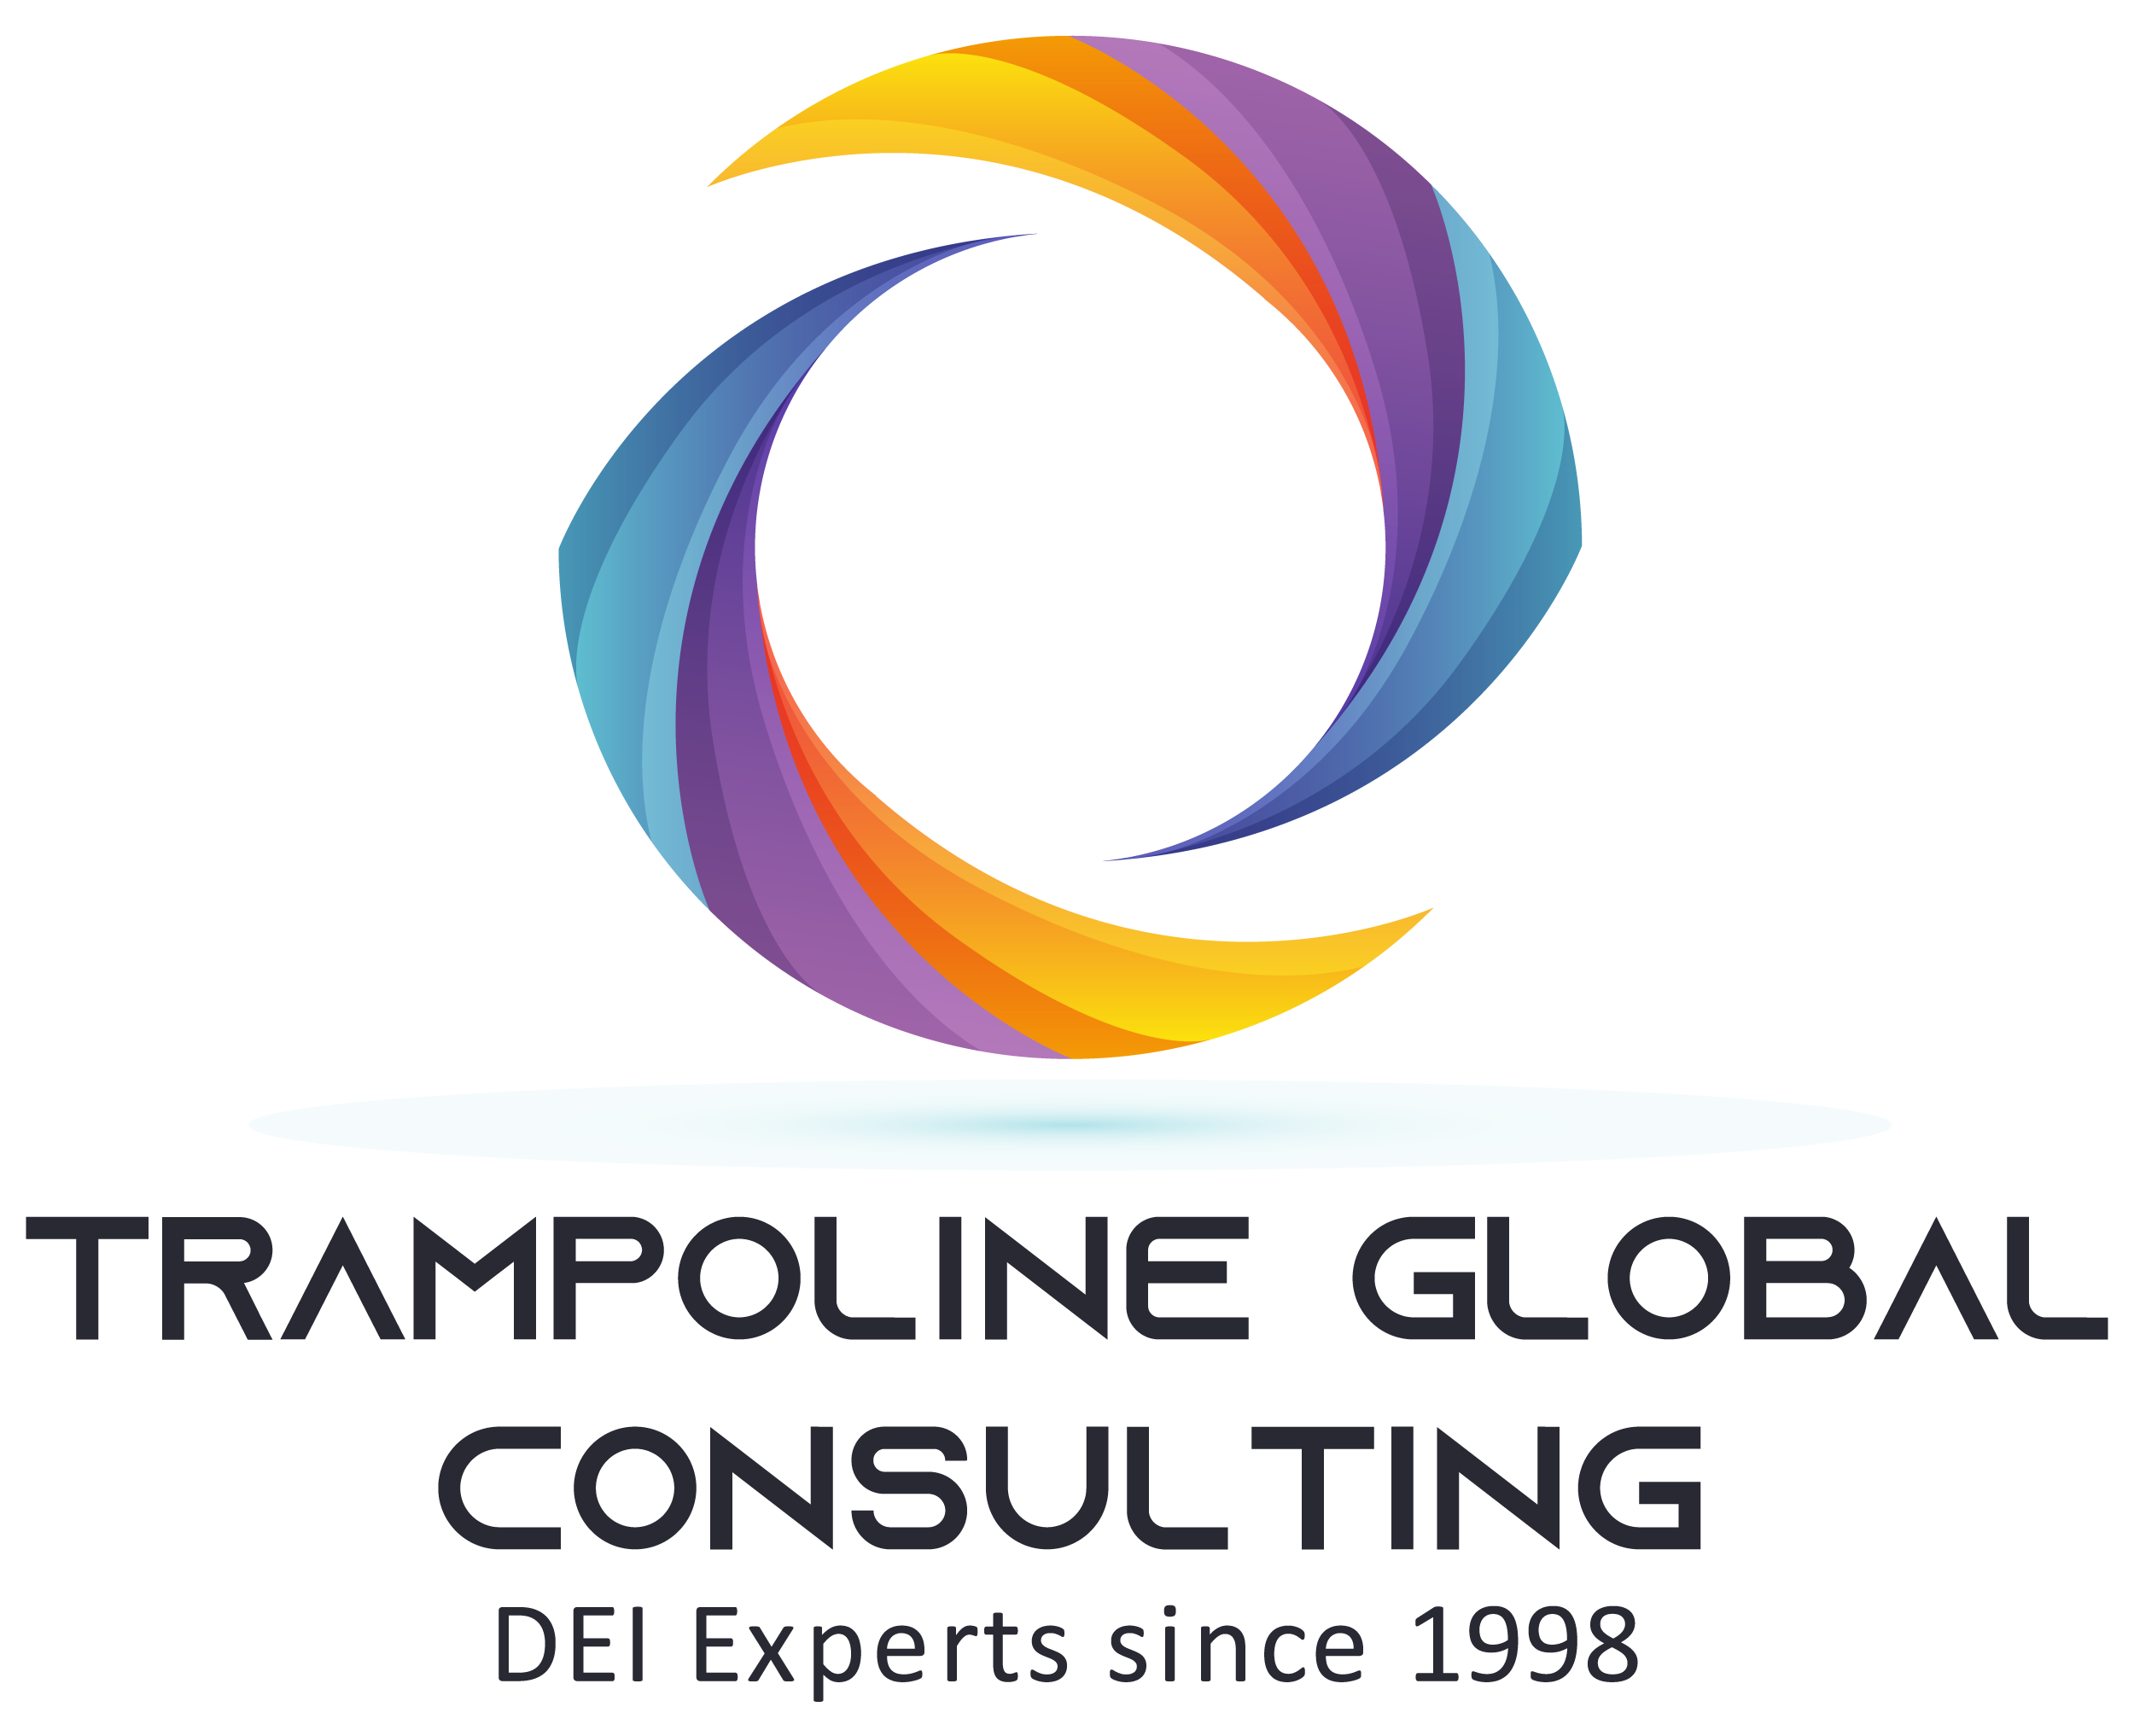 Trampoline Global Consulting-DEI Experts Since 1998